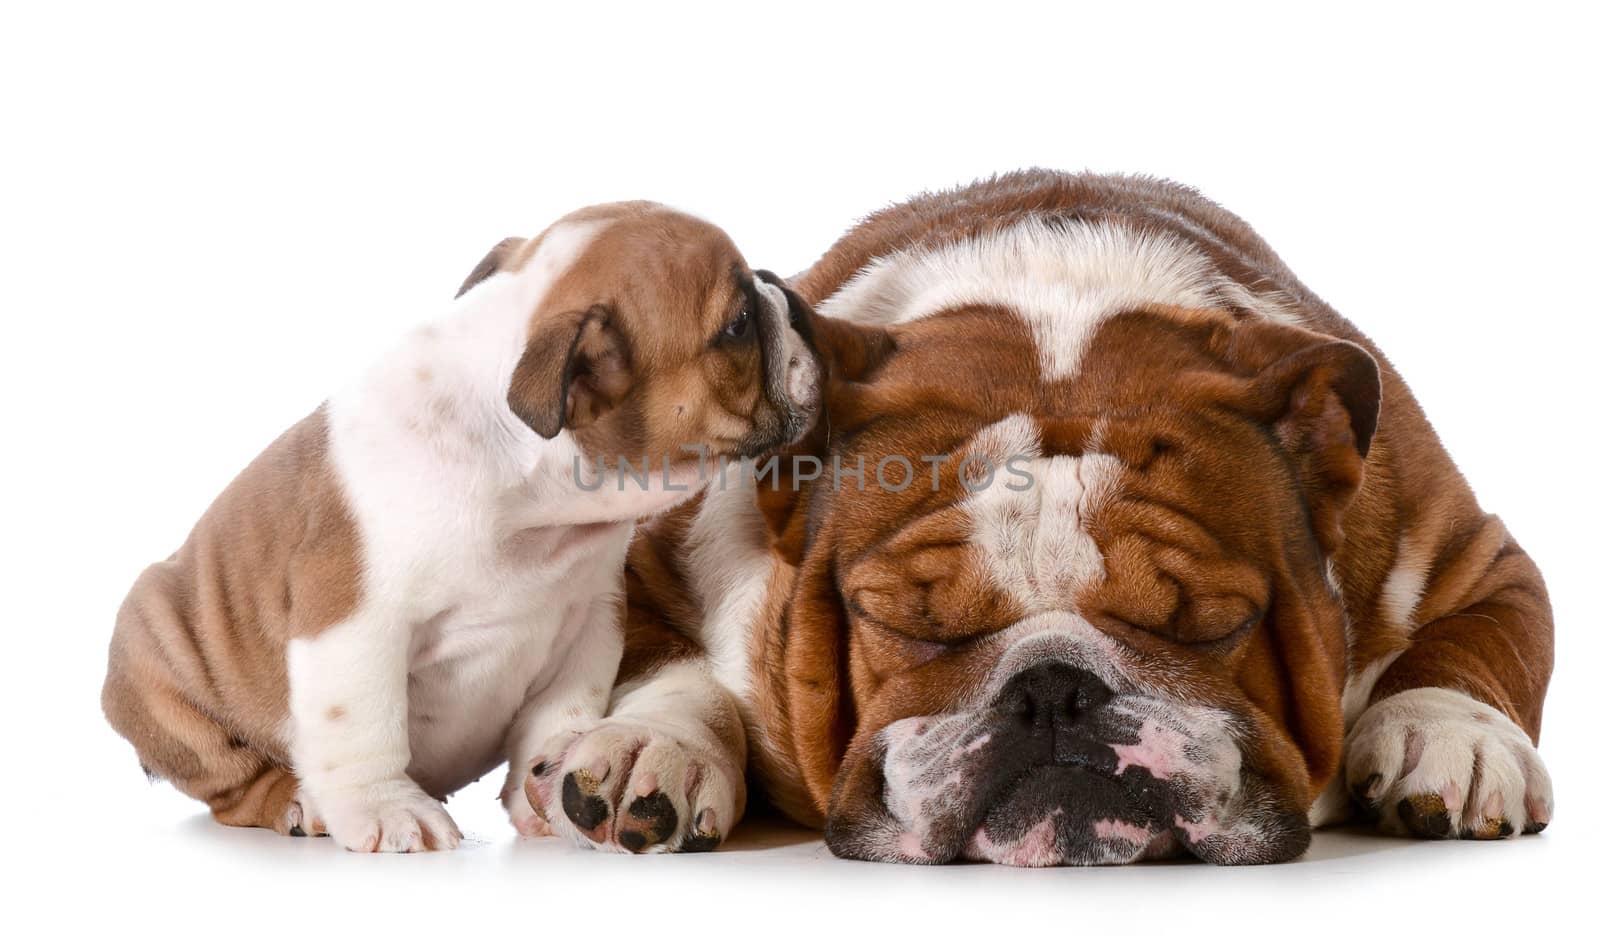 telling secrets - english bulldog puppy telling his father a secret isolated on white background - 8 weeks old